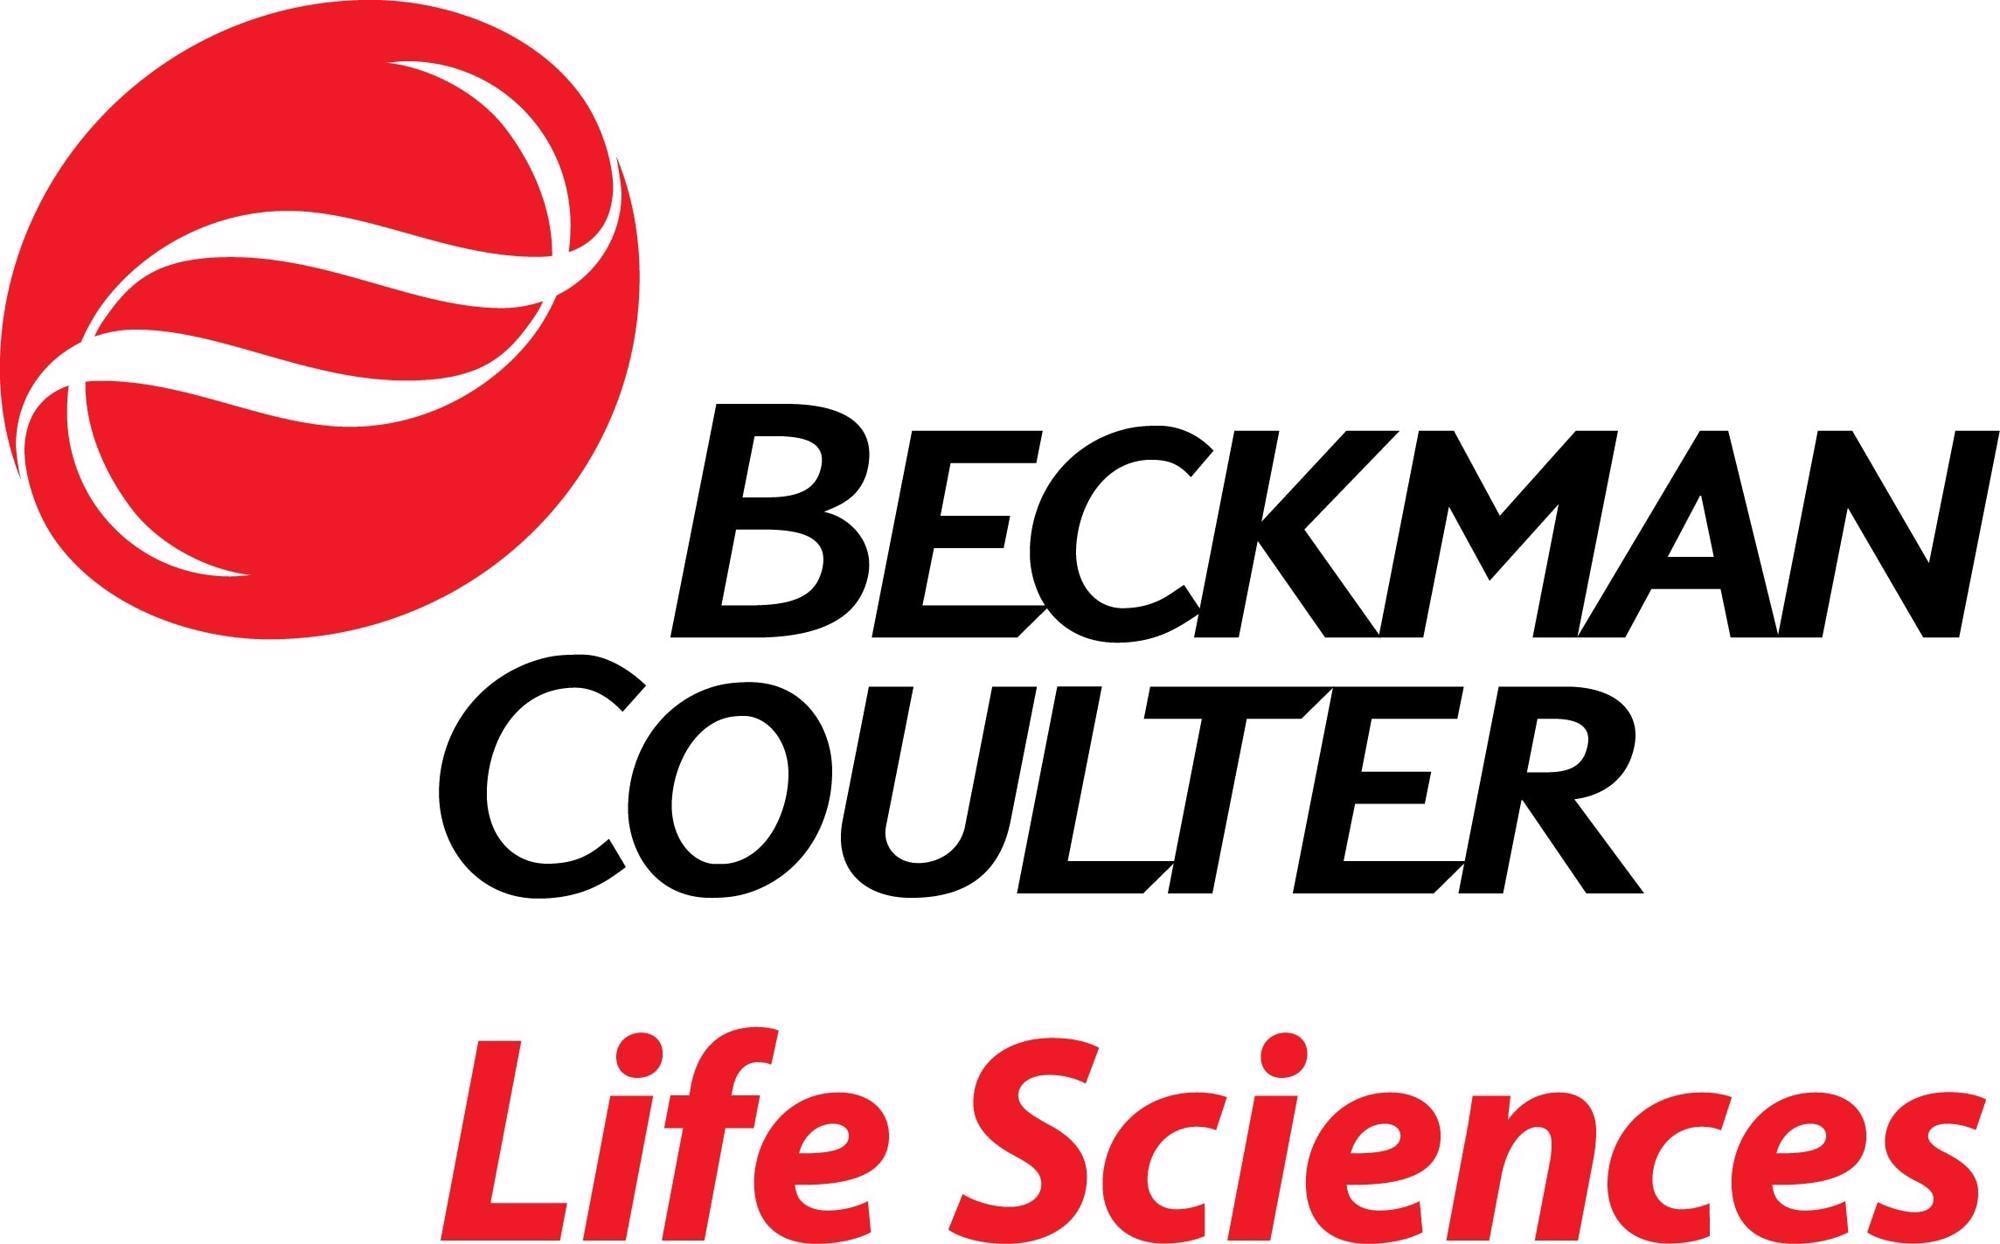 Beckman Coulter Life Sciences - Auto-Cellular and Proteomics